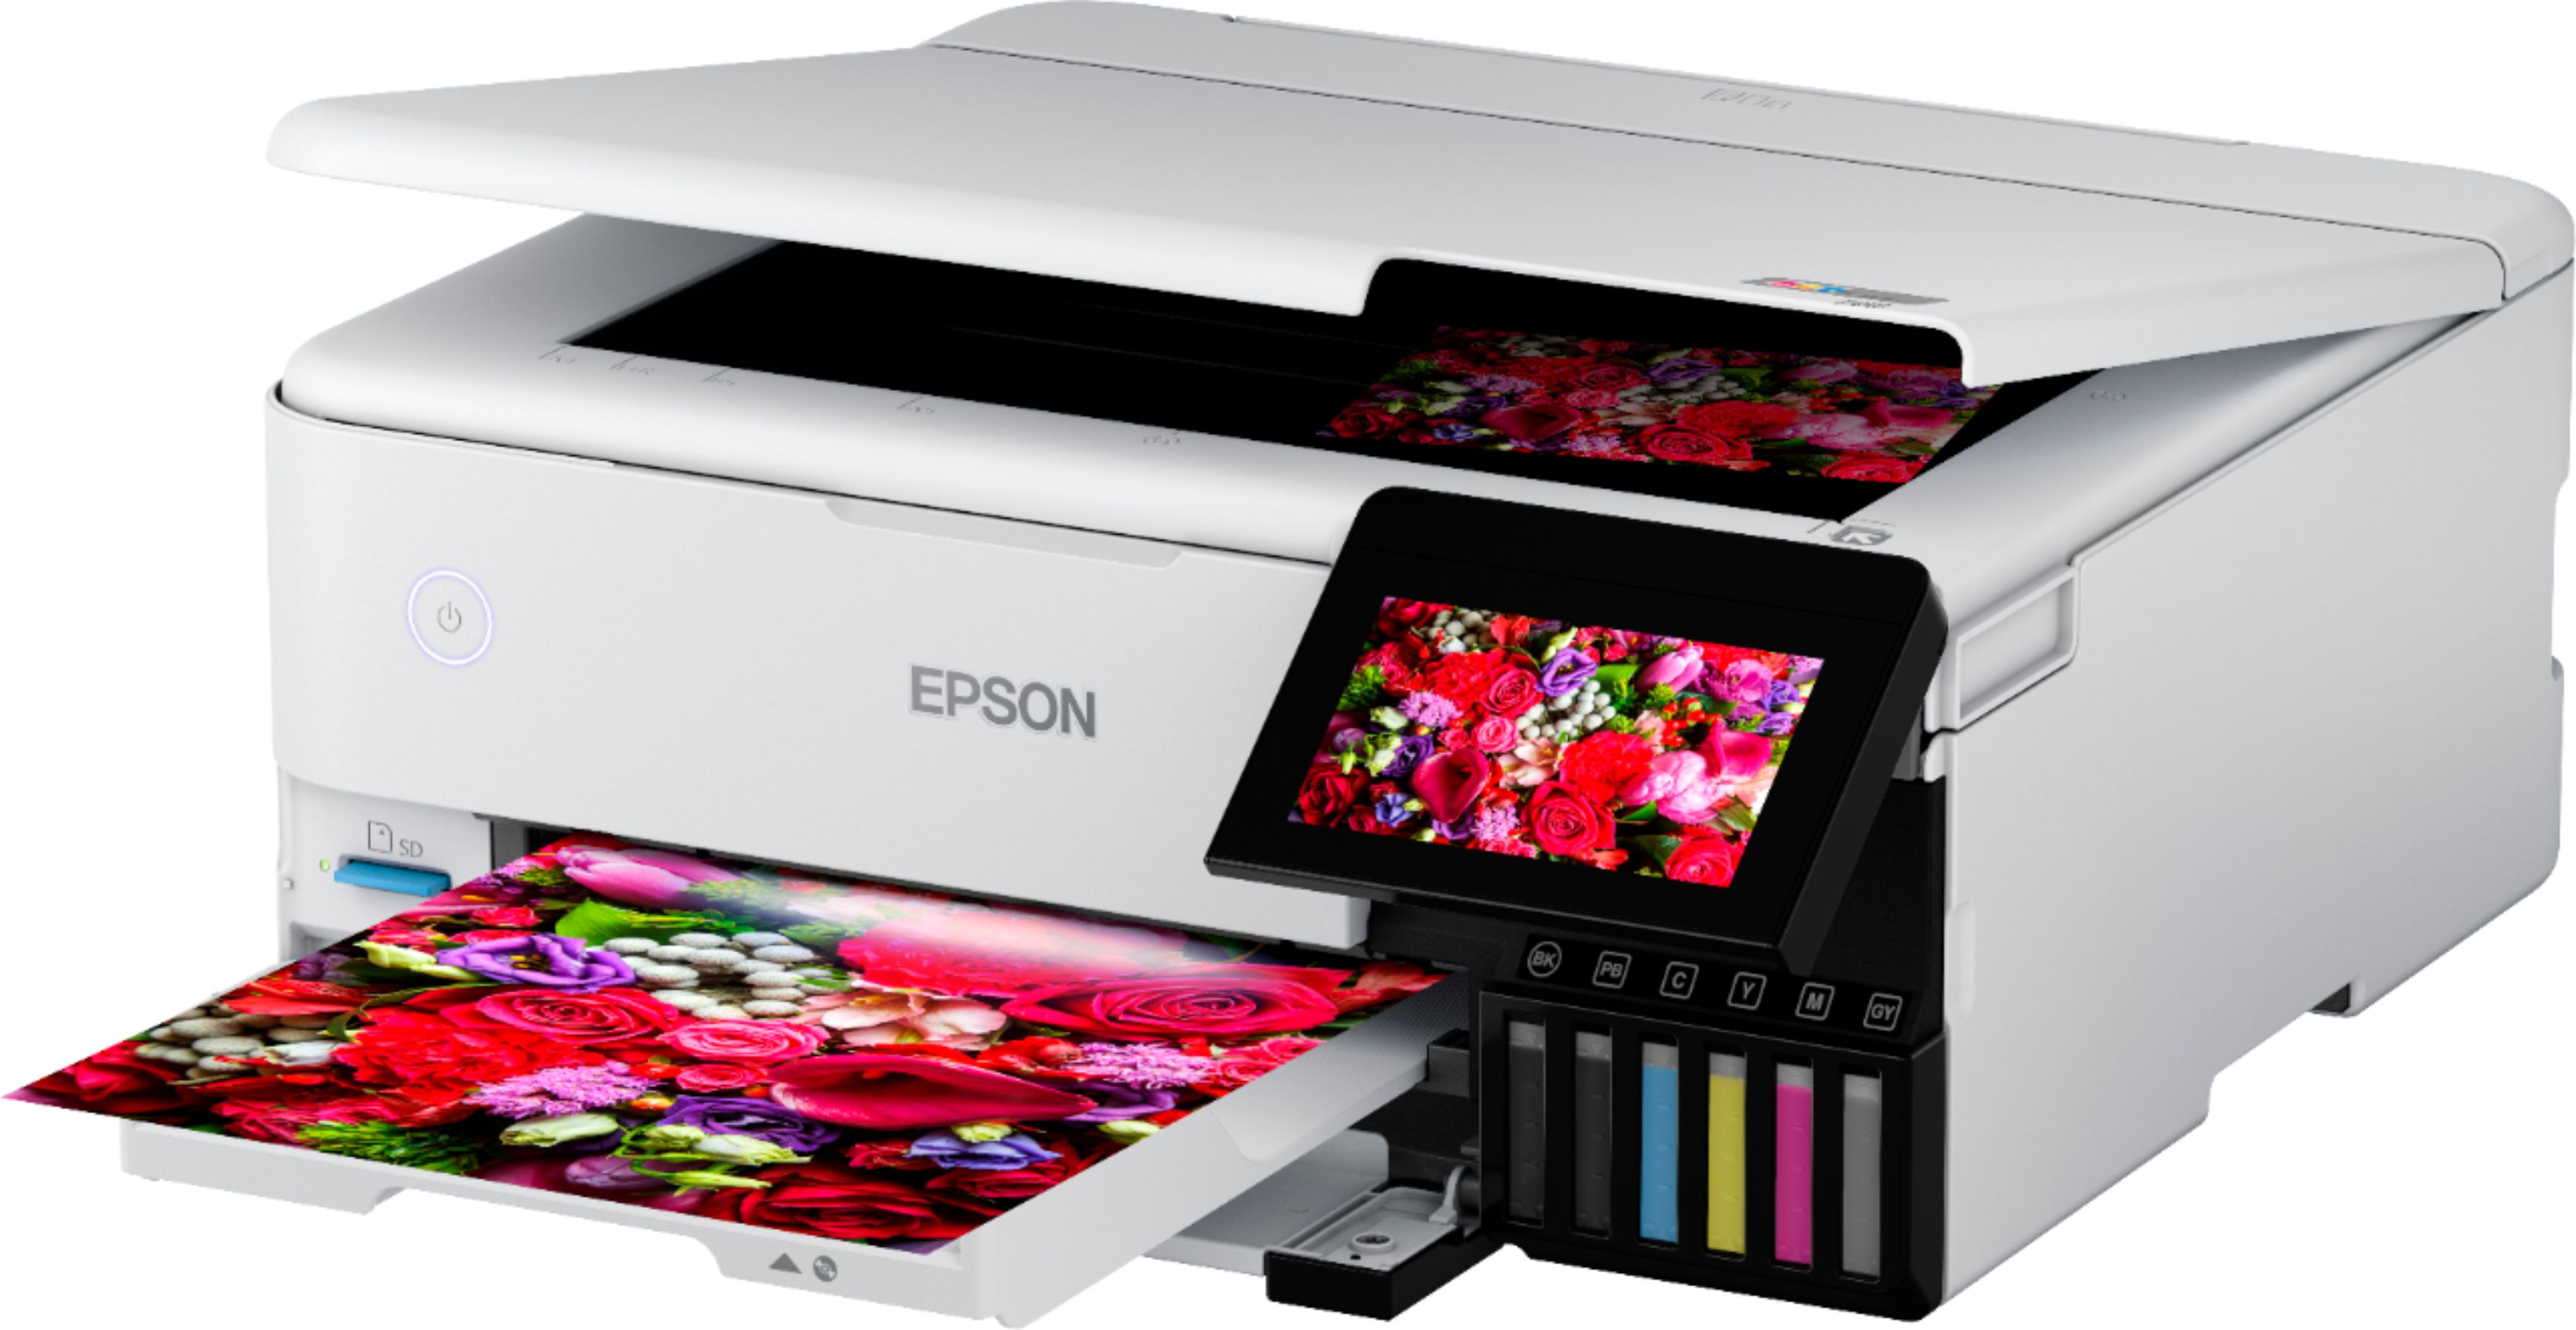 Epson EcoTank® Photo ET-8500 Wireless Color All-in-One Supertank